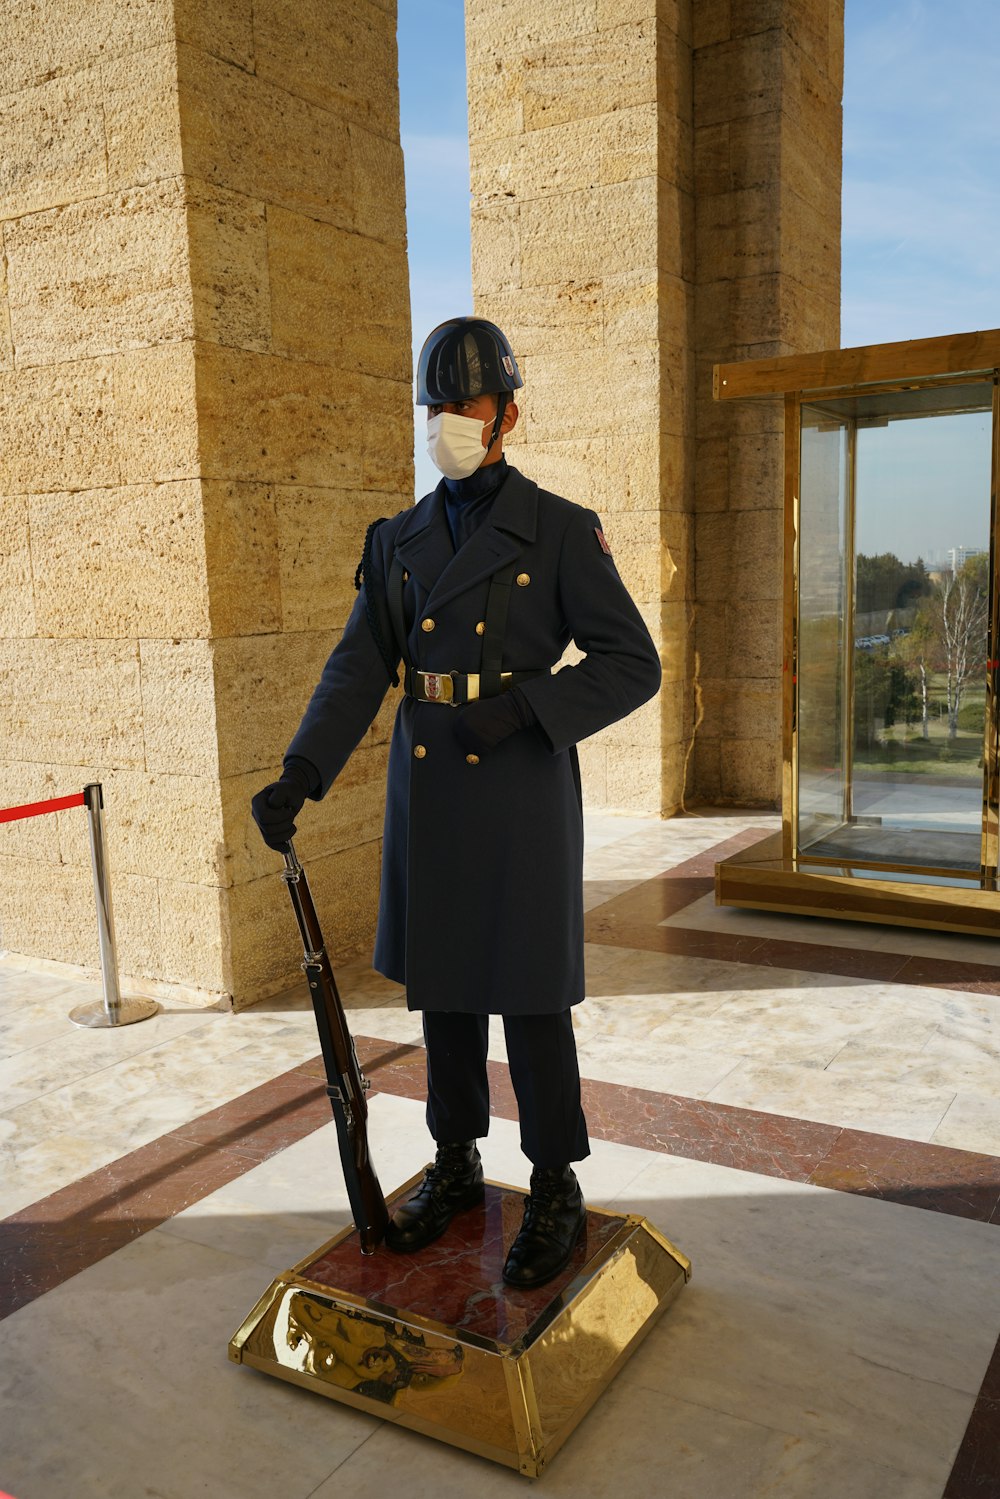 a statue of a man in a military uniform holding a rifle